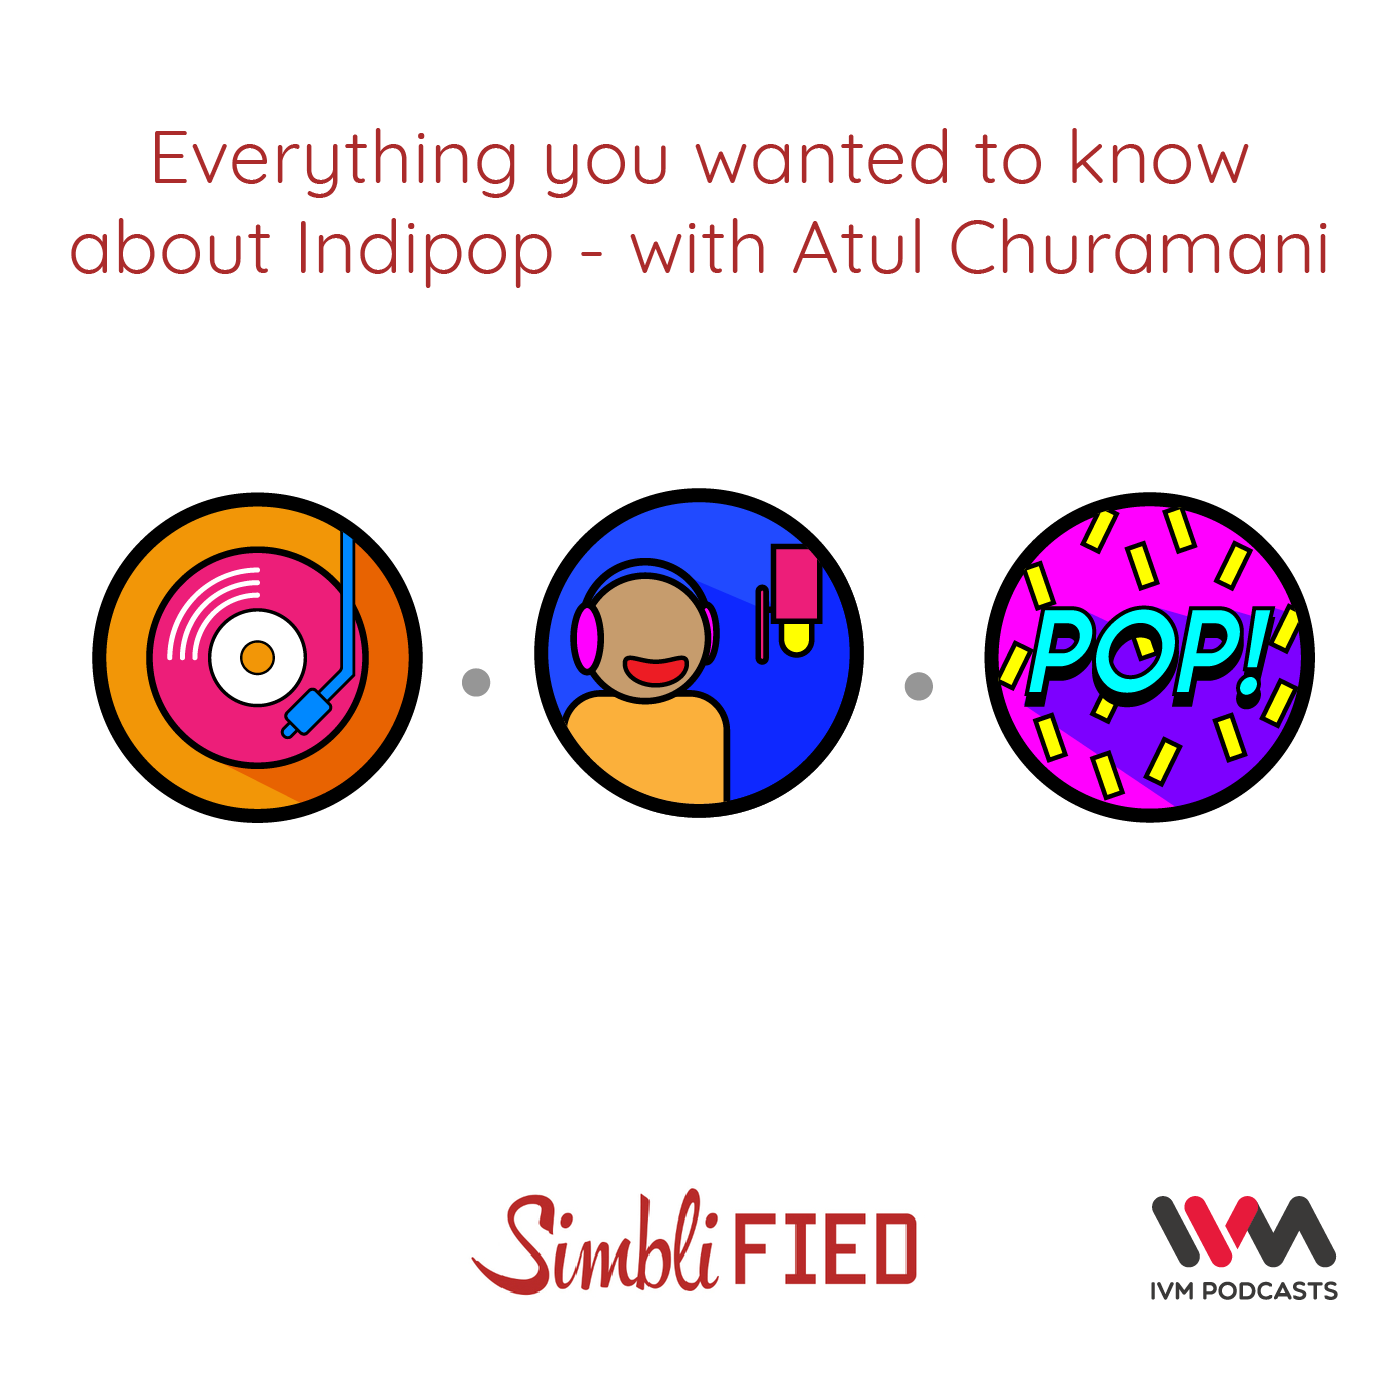 Ep. 111: Everything you wanted to know about Indipop - with Atul Churamani